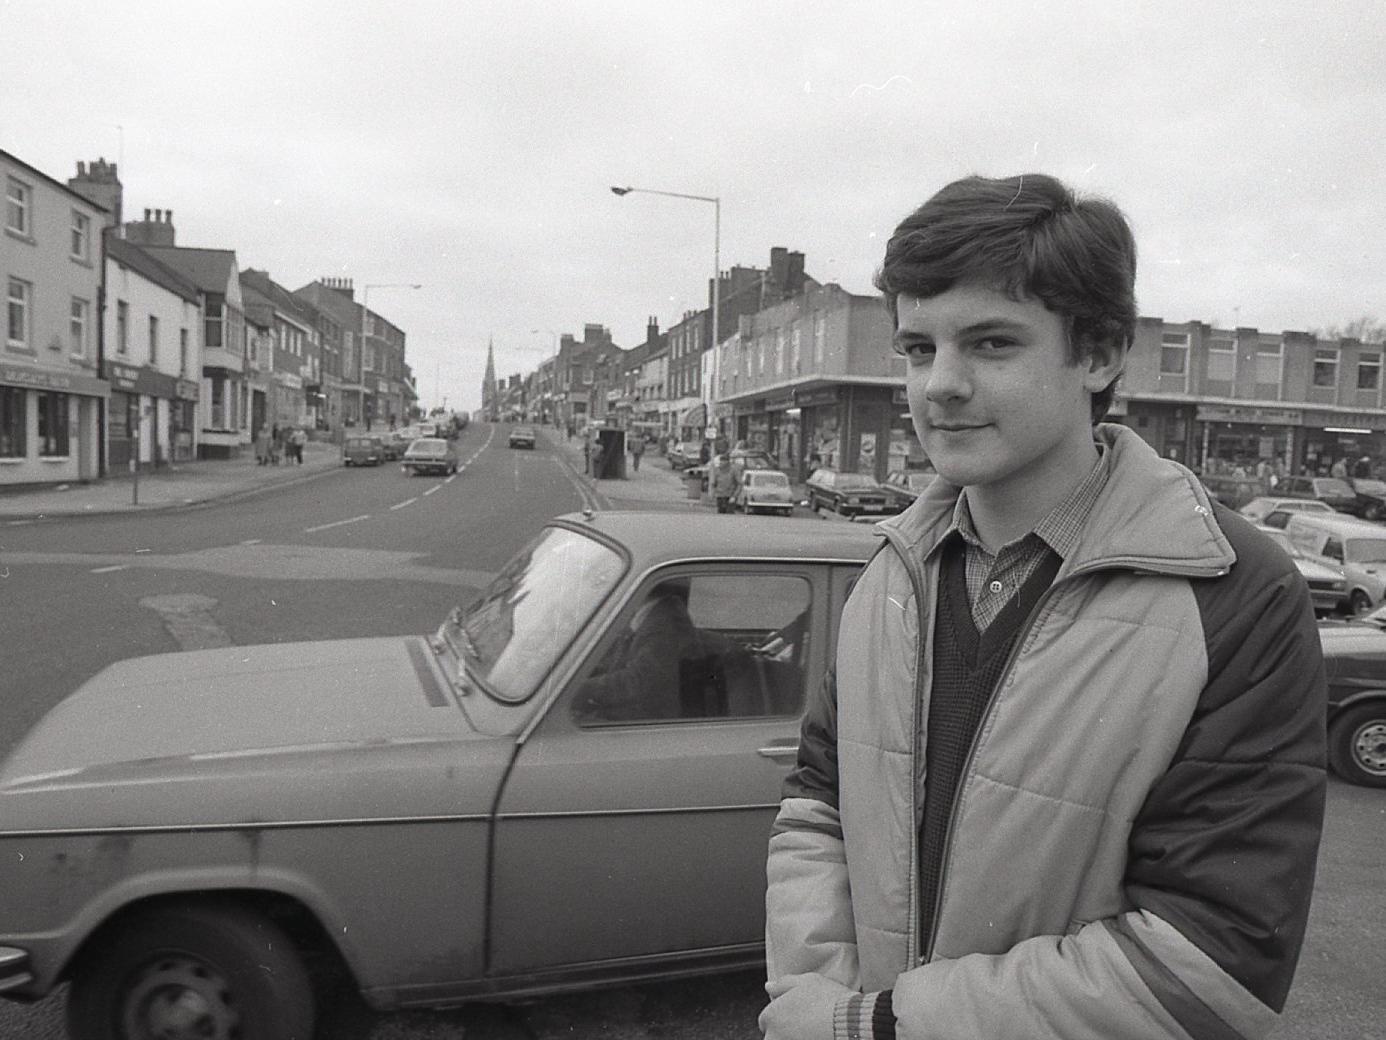 The town of Kirkham has come under heavy criticism - through a schoolboy's investigation. For Simon Phillipson's survey shows that most people are less than happy with the Lancashire market town. Simon, aged 15 (above), produced the survey for a geography field-study at Kirkham Grammar School